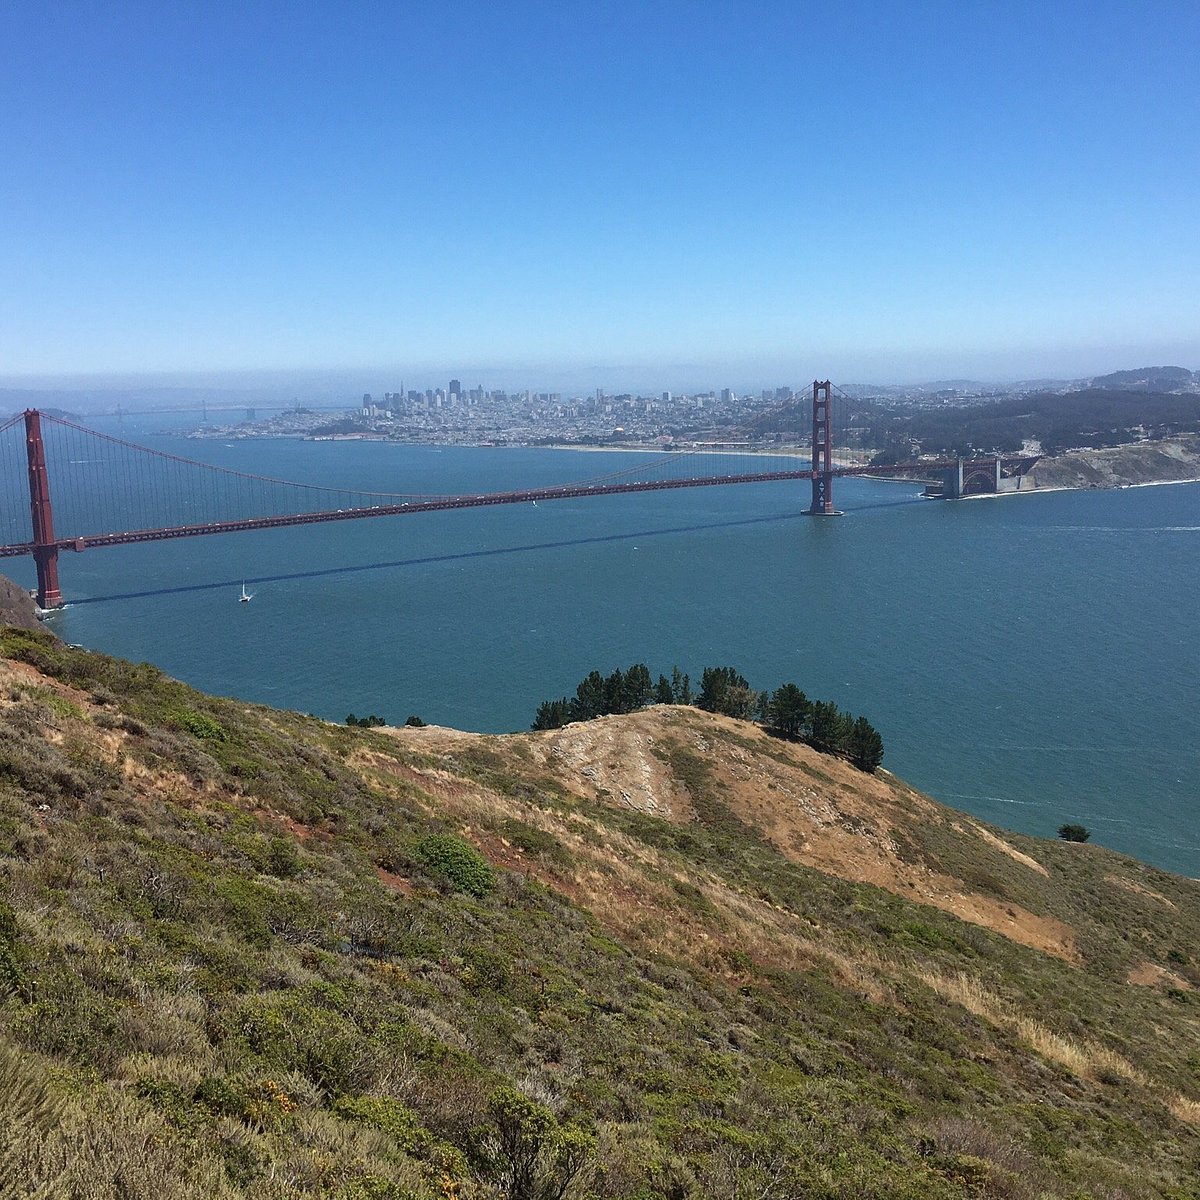 ST San Francisco Tours and Charters (Pinole, CA): Hours, Address ...